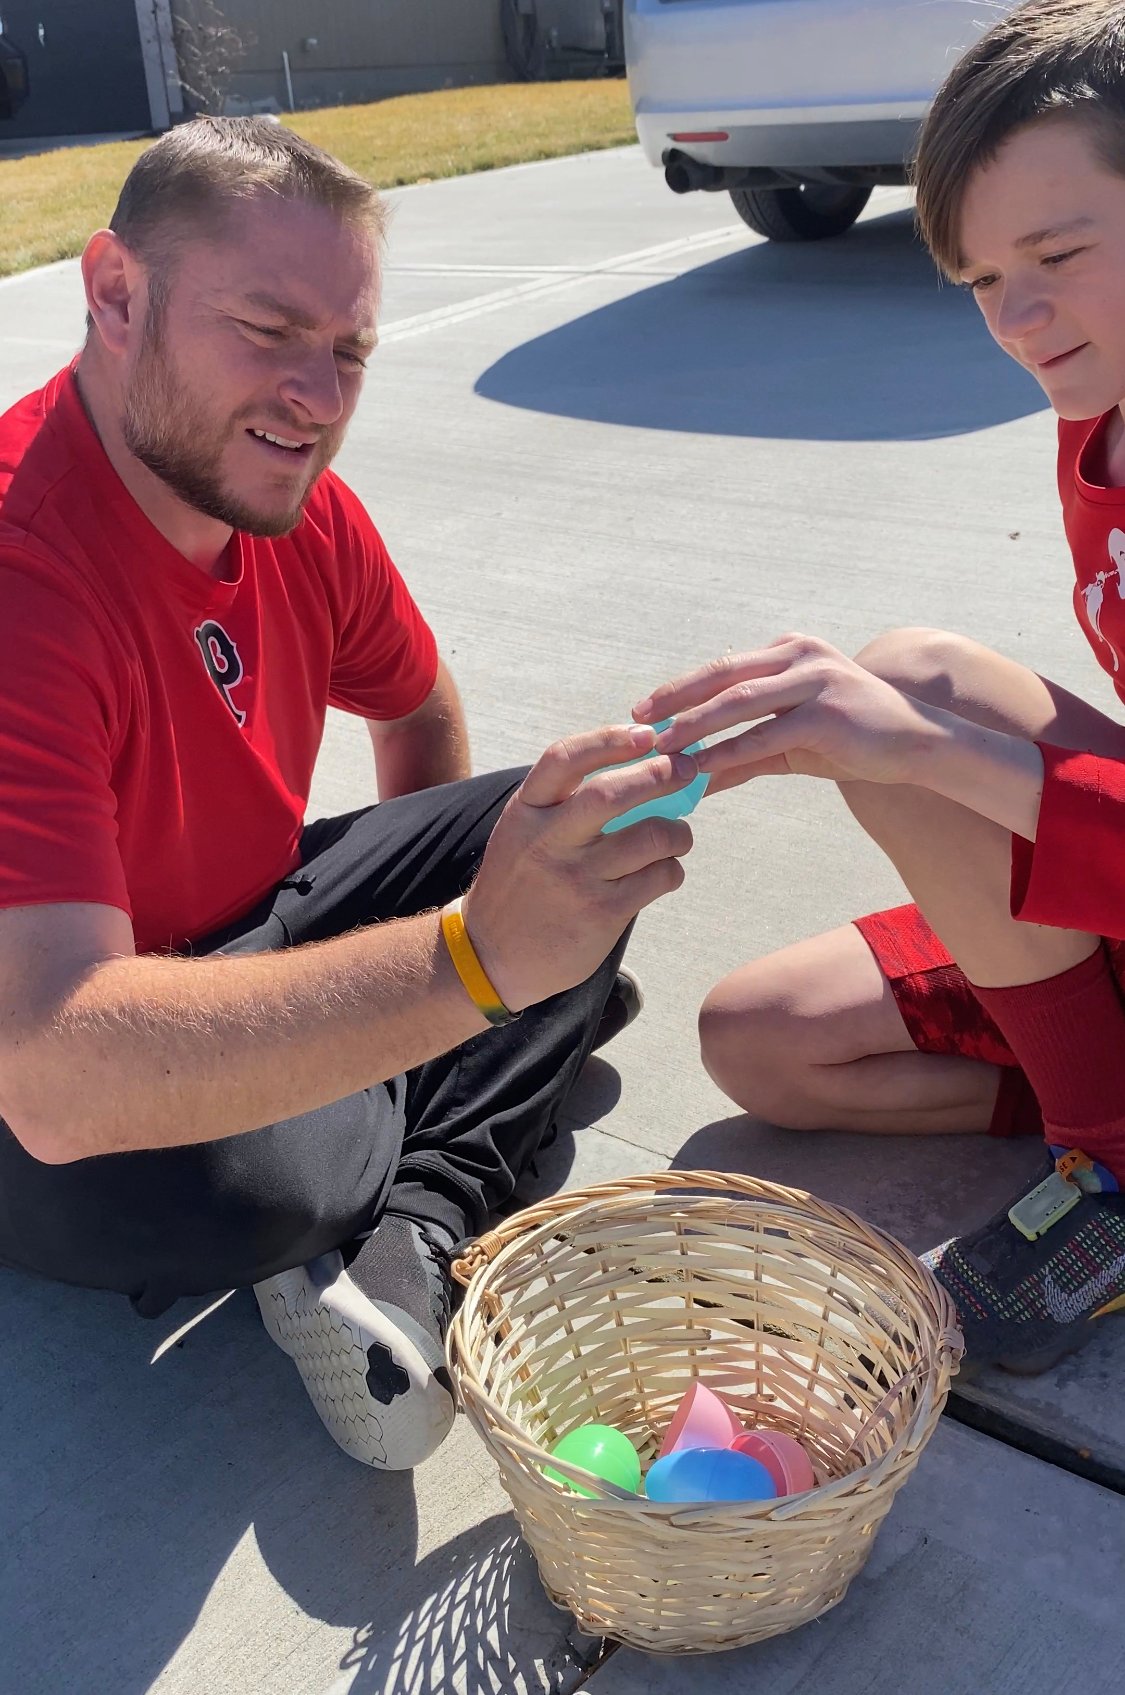 Dad and son playing Easter games together